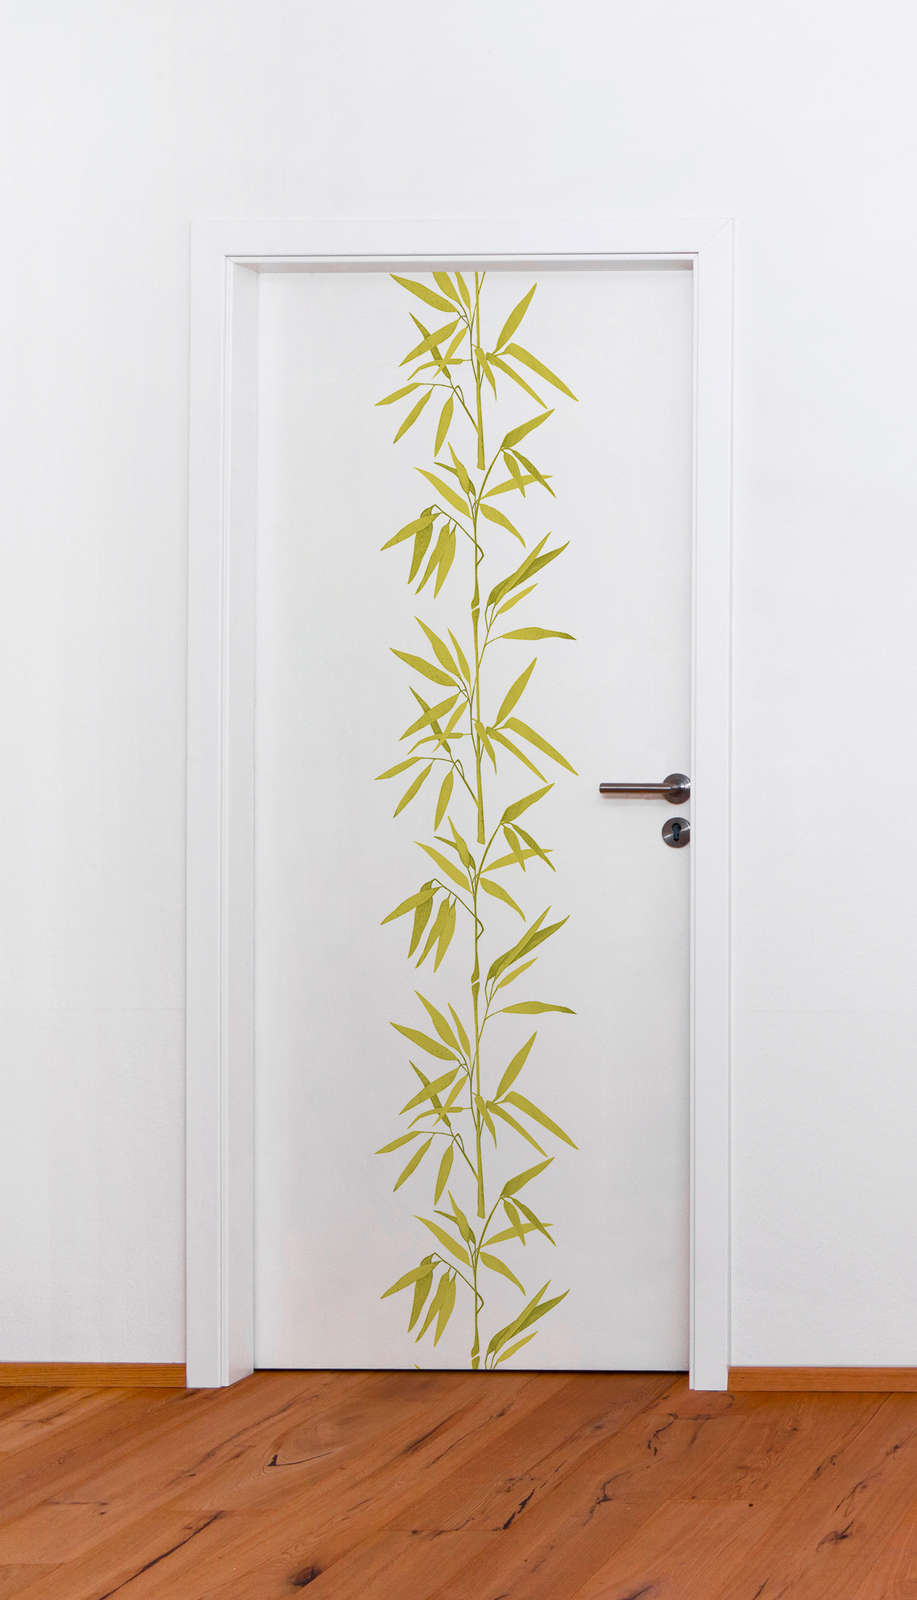             Non-woven wallpaper white with bamboo pattern - green, white
        